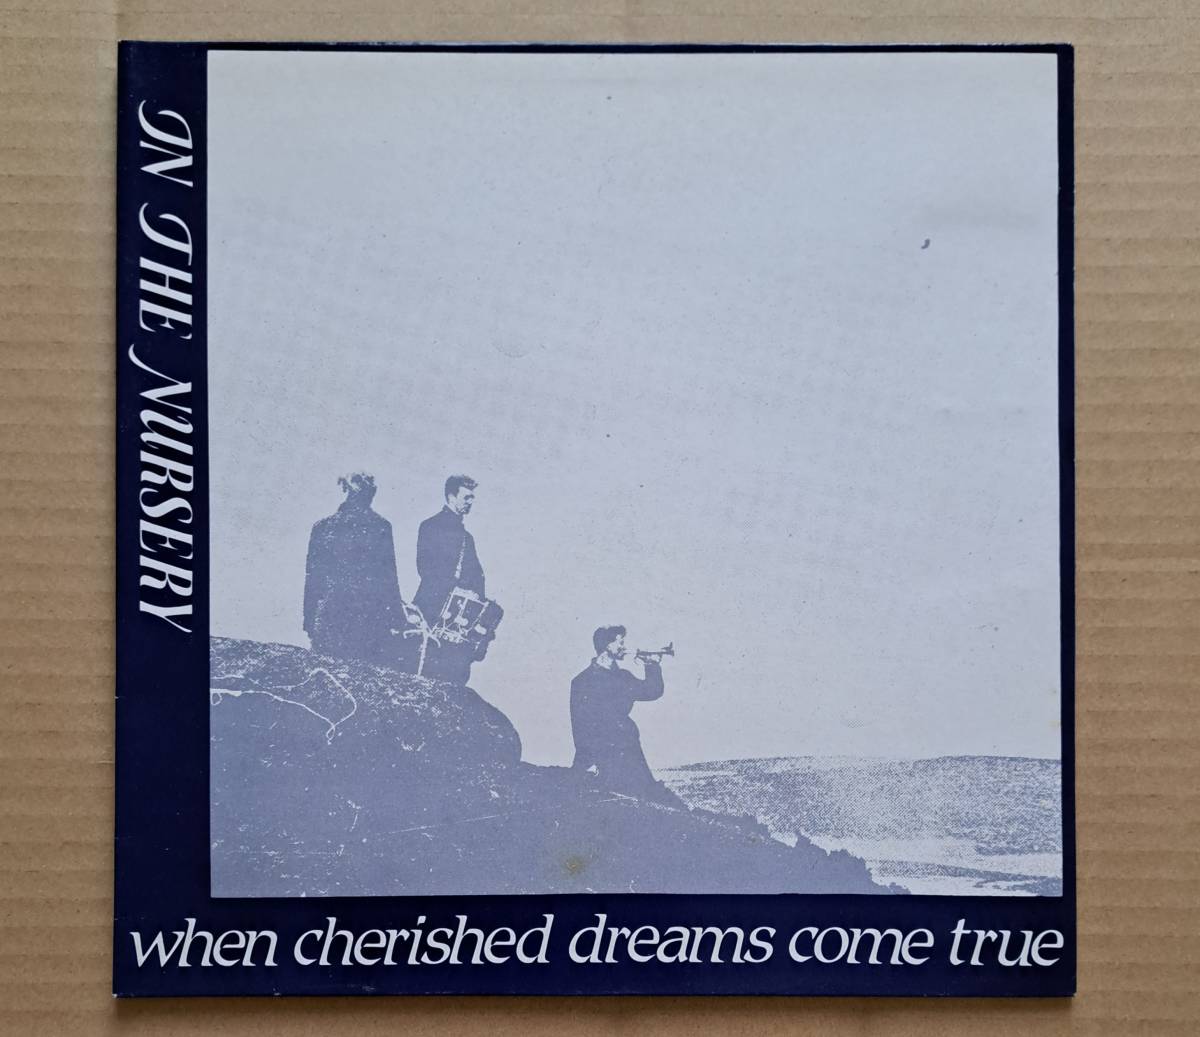 UK盤12inch◎In The Nursery『When Cherished Dreams Come Ture』VIRTUE 2 Paragon イン・ザ・ナーサリー インディロック ダークウェイヴ_画像1